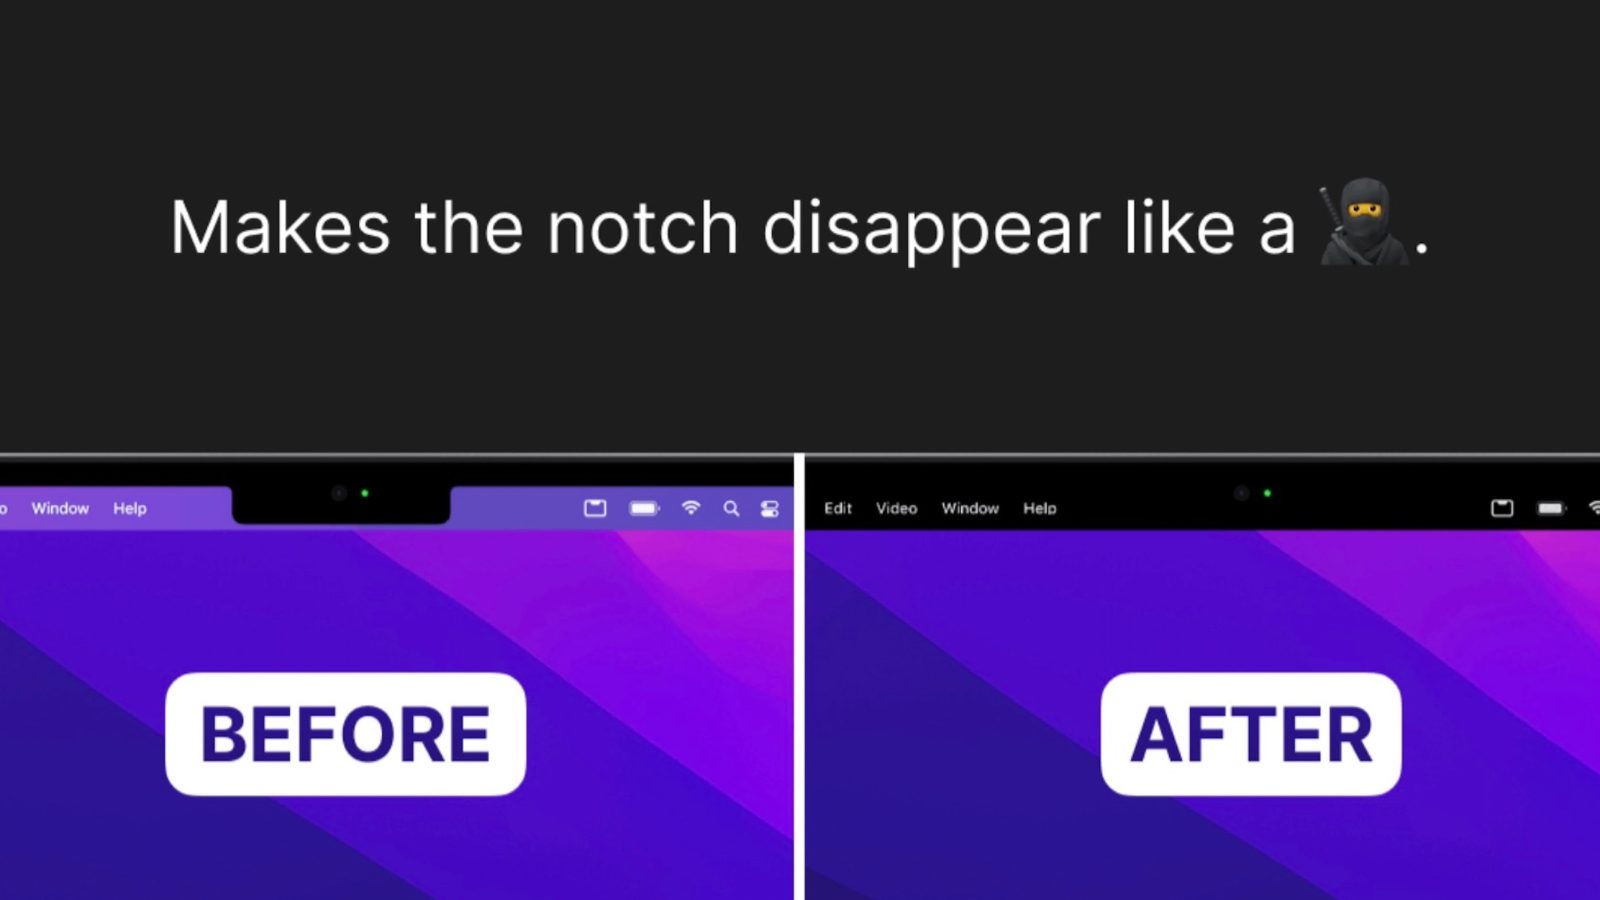 Handson 'Top Notch' hides the new MacBook Pro's notch, if that's what